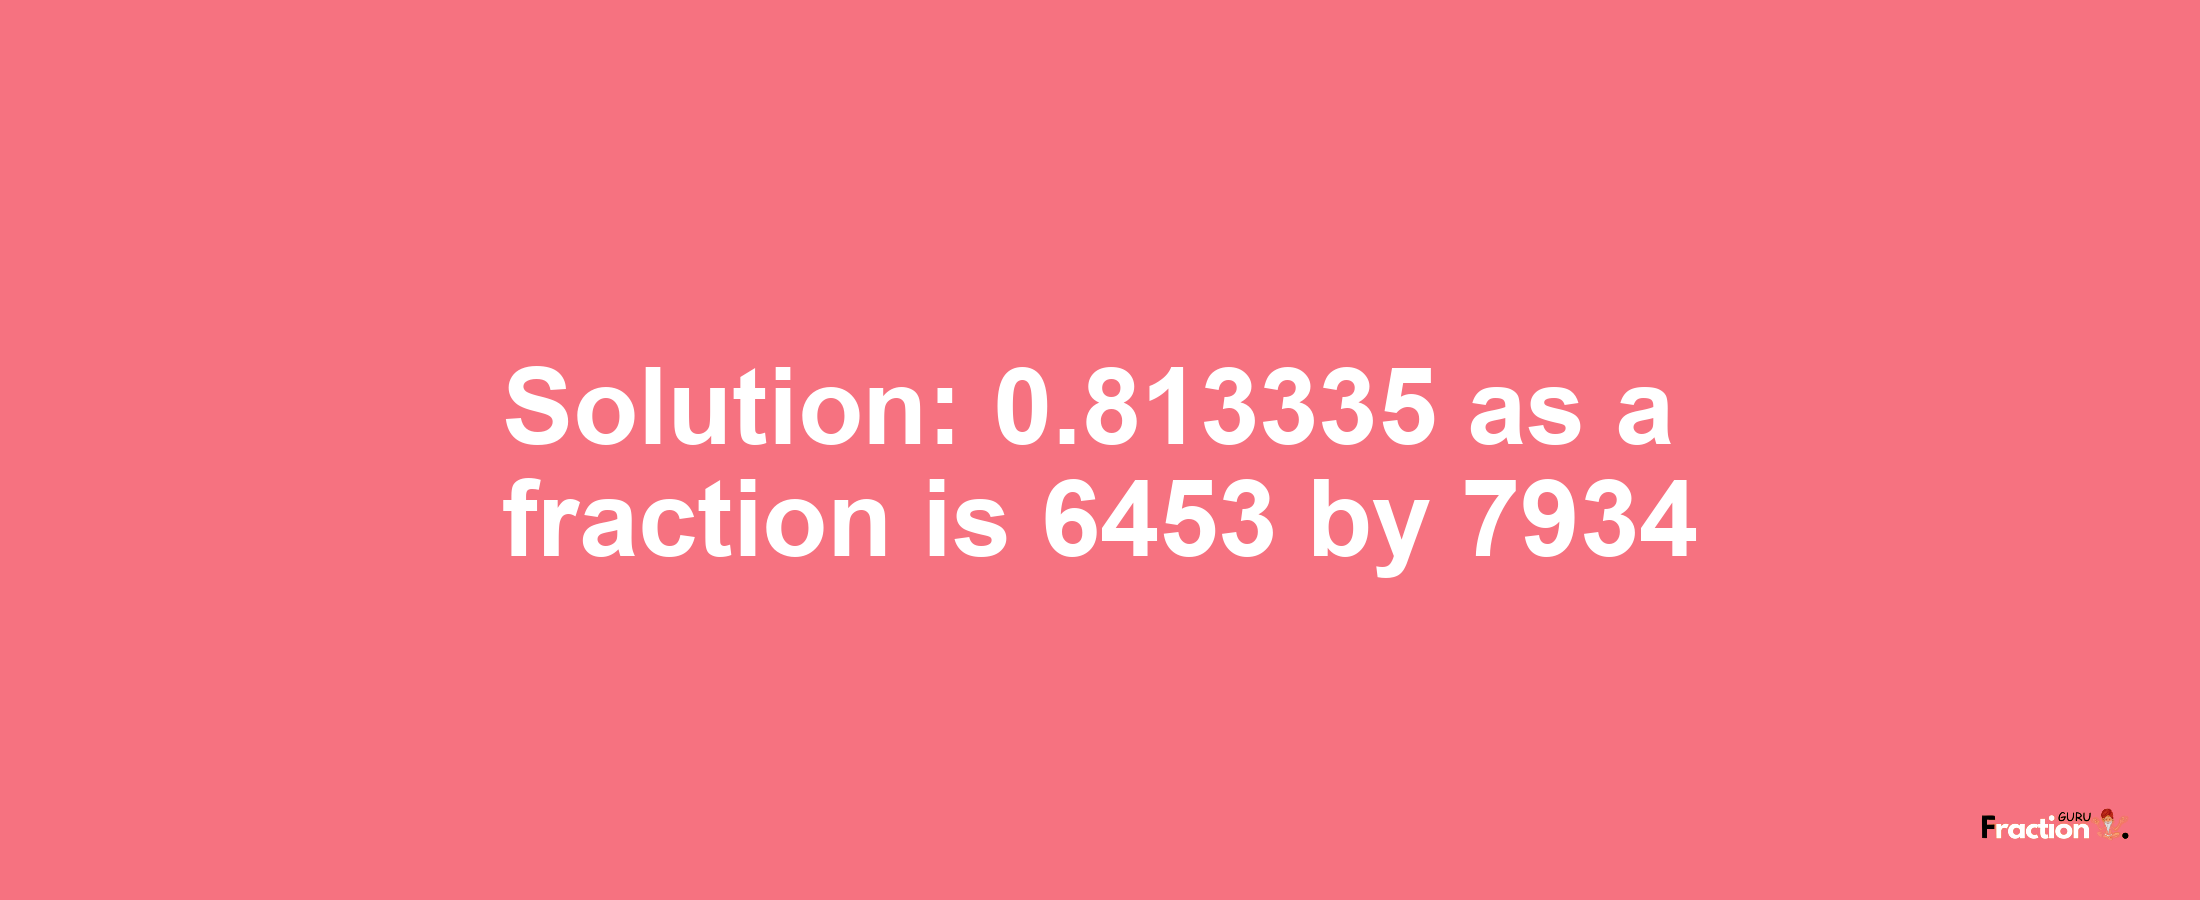 Solution:0.813335 as a fraction is 6453/7934